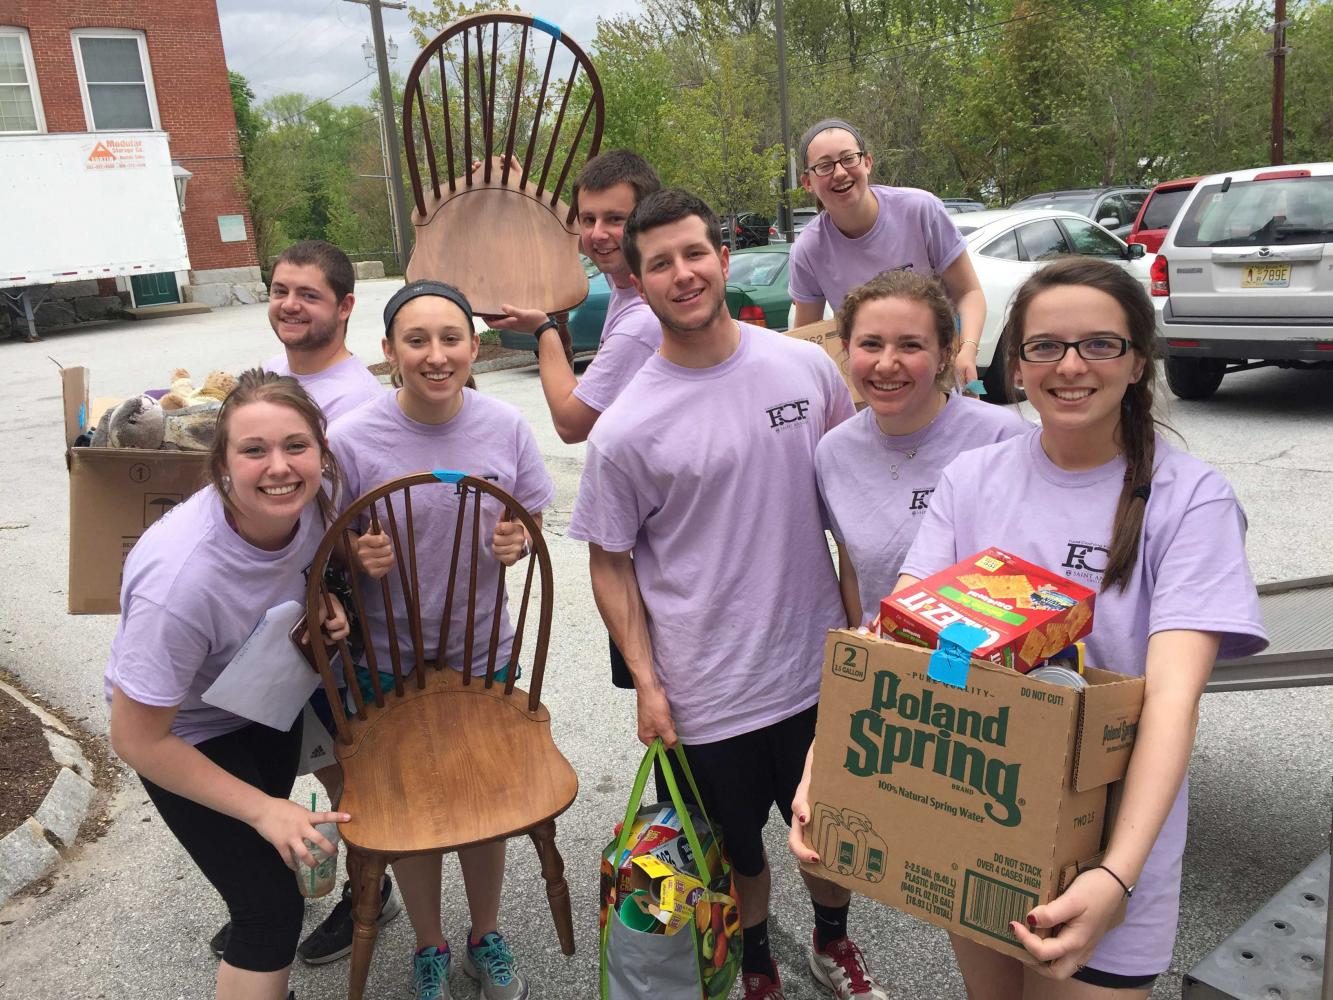 (Left to right): Amy Vachon ’17, Charles Dooley ’16, Madison Vigneault ’18, Josh Post ’16, Paul Trabucco ’16, Amelia Way ’16, Mar-
garet Lynch ’17, and Jessica Gipson ’16 at the 2016 Food, Clothing, & Furniture drive.